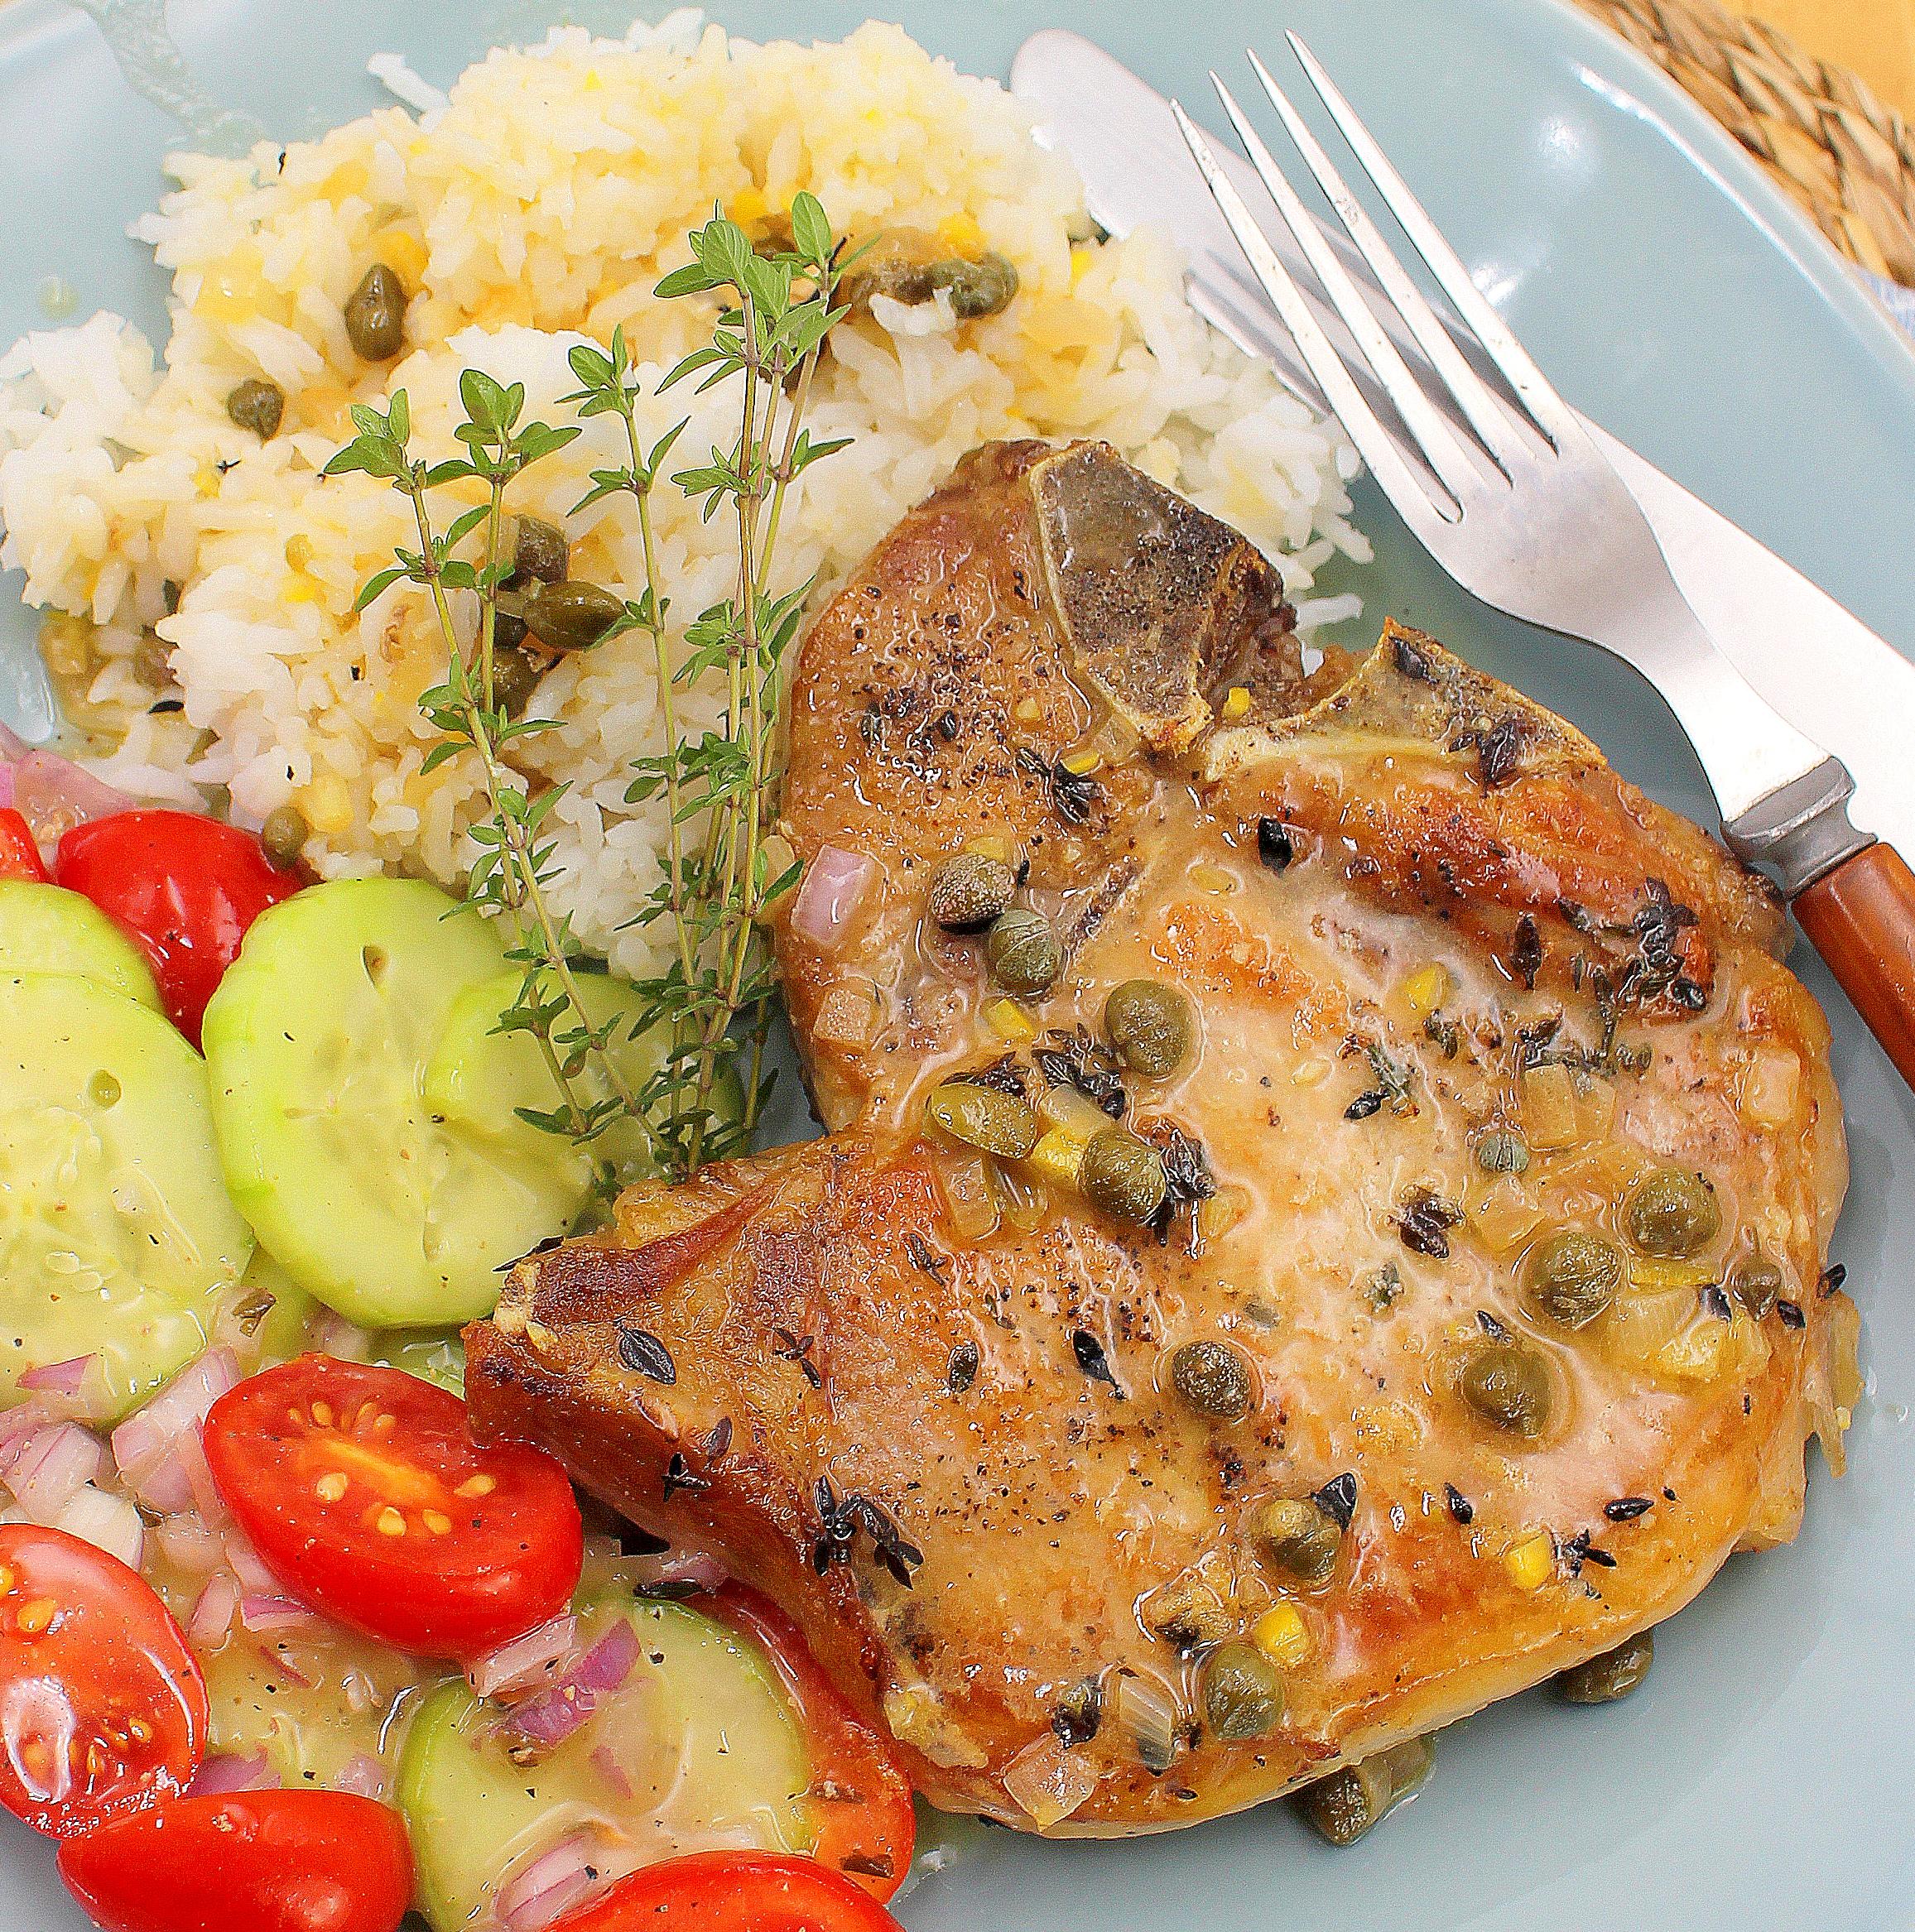  Lemon and parsley create a perfect balance of flavors in these delicious pork chops.